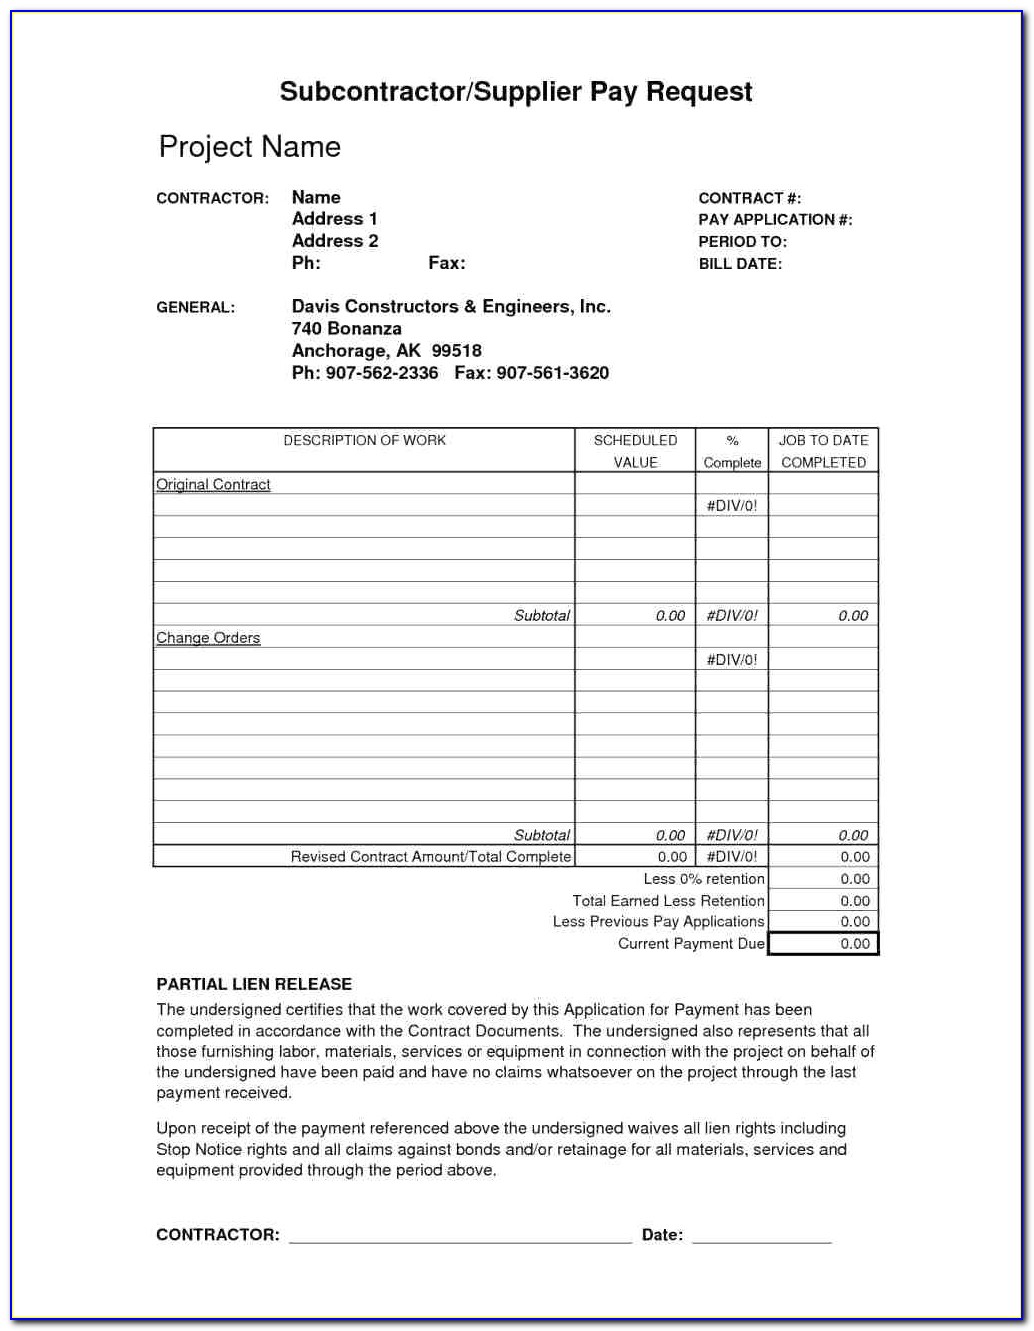 Construction Draw Request Form Template